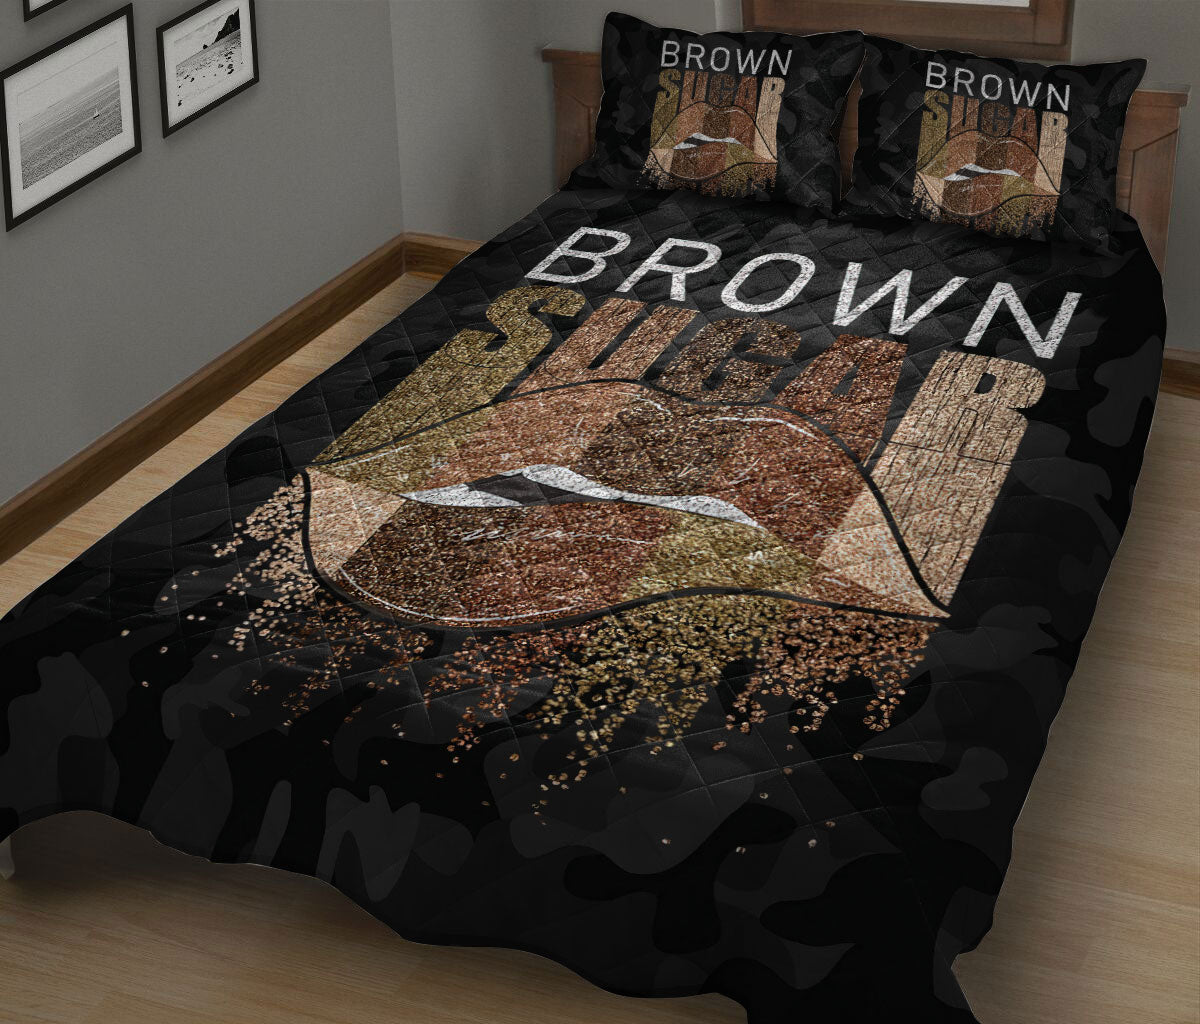 Ohaprints-Quilt-Bed-Set-Pillowcase-Afro-African-American-Black-Girl-Princess-Natural-Hairstyle-Brown-Sugar-Blanket-Bedspread-Bedding-1451-King (90'' x 100'')